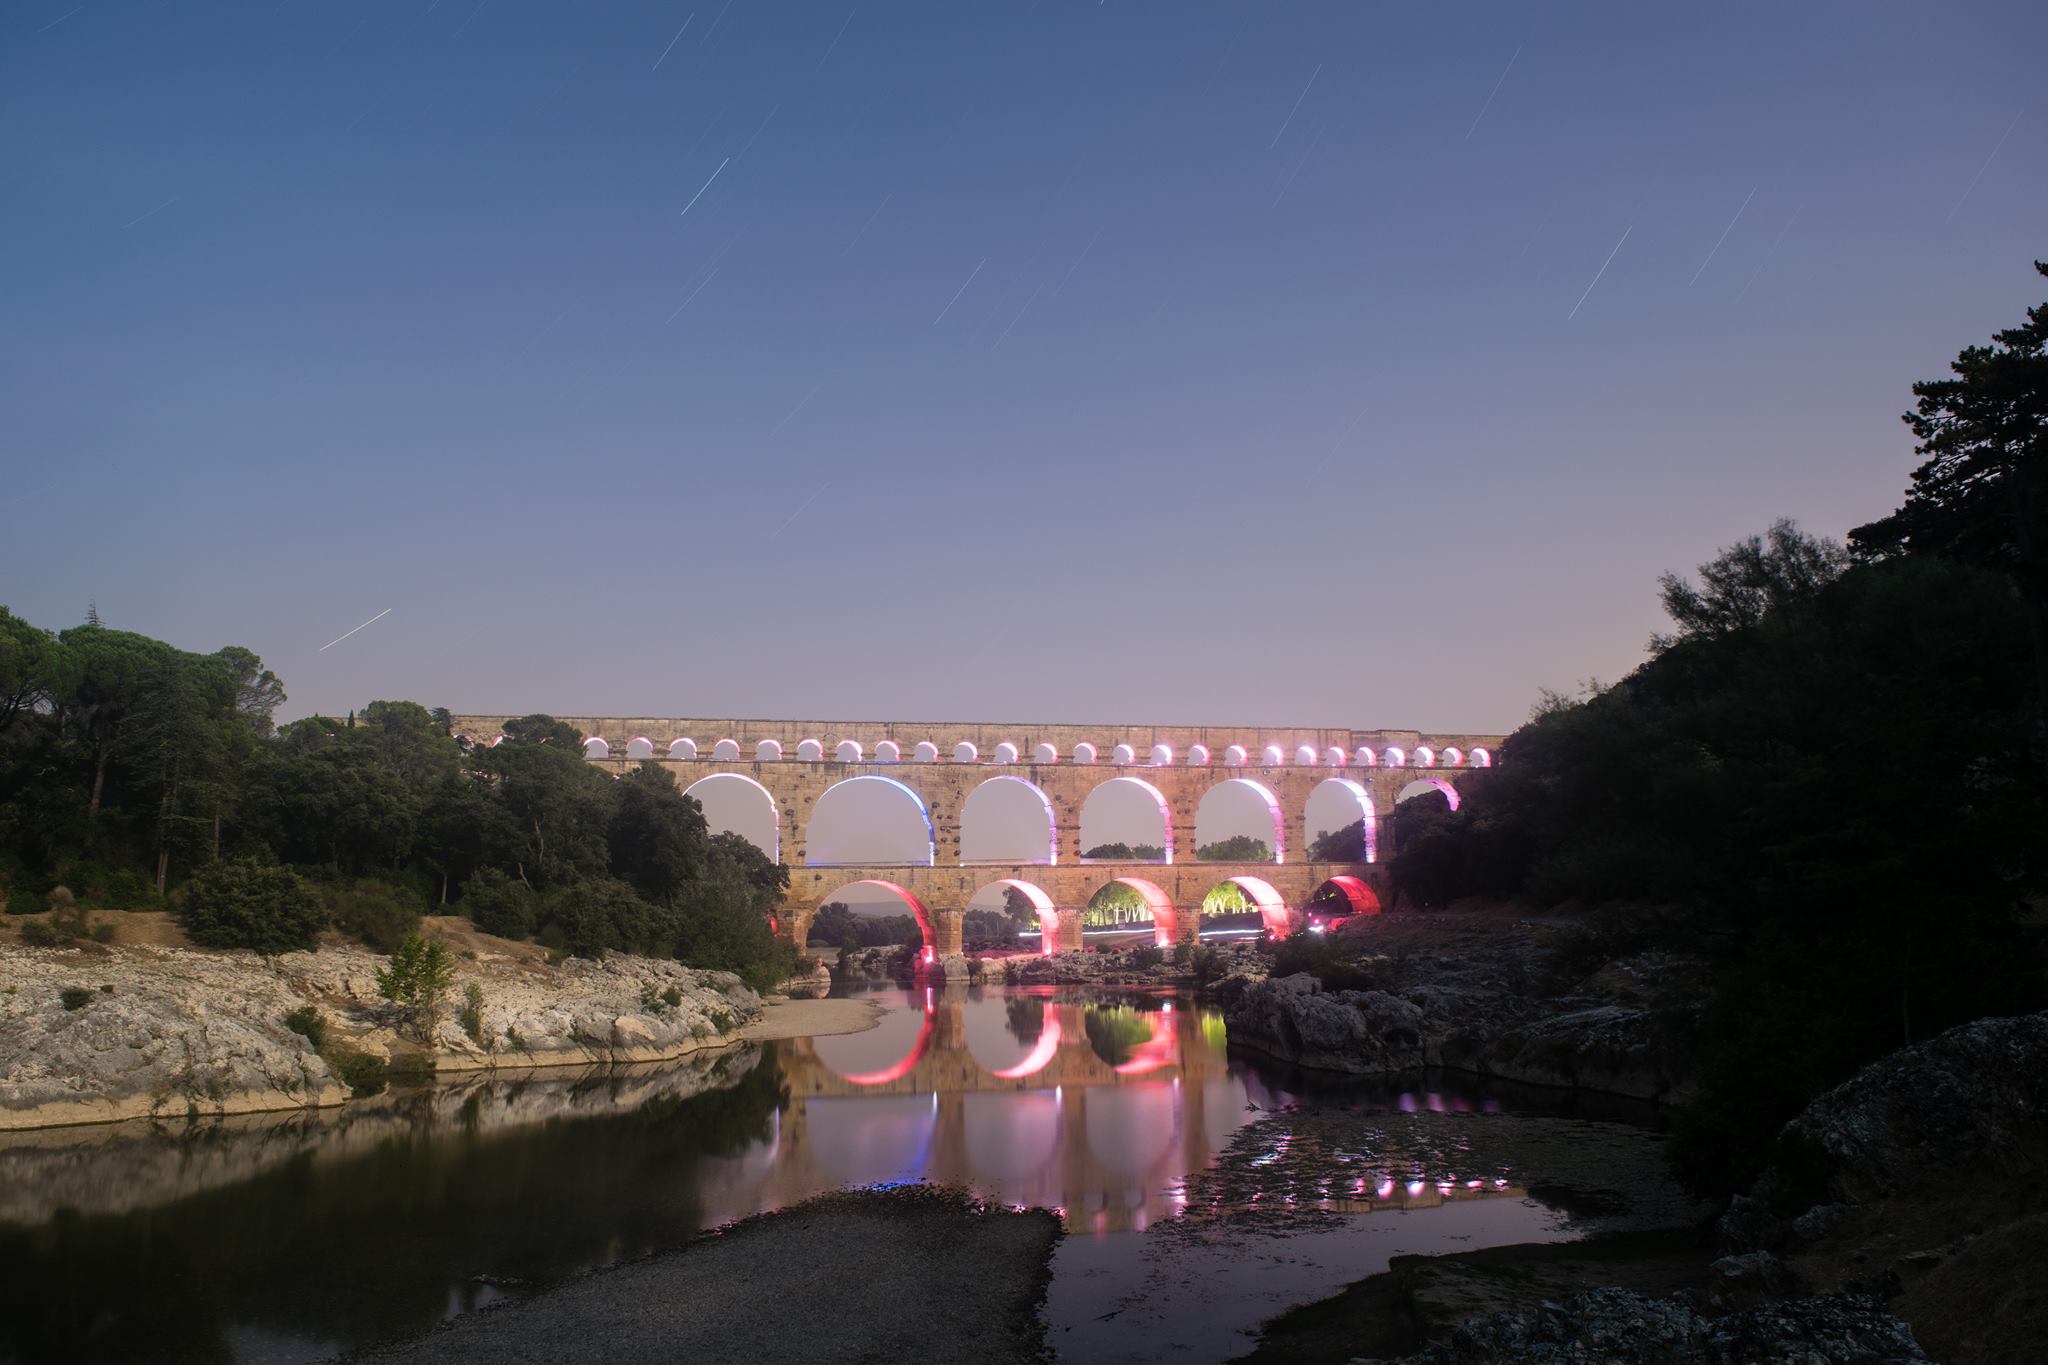 I camped (illegally) near Pont Du Gard and was rewarded with this amazing view (long shutter)